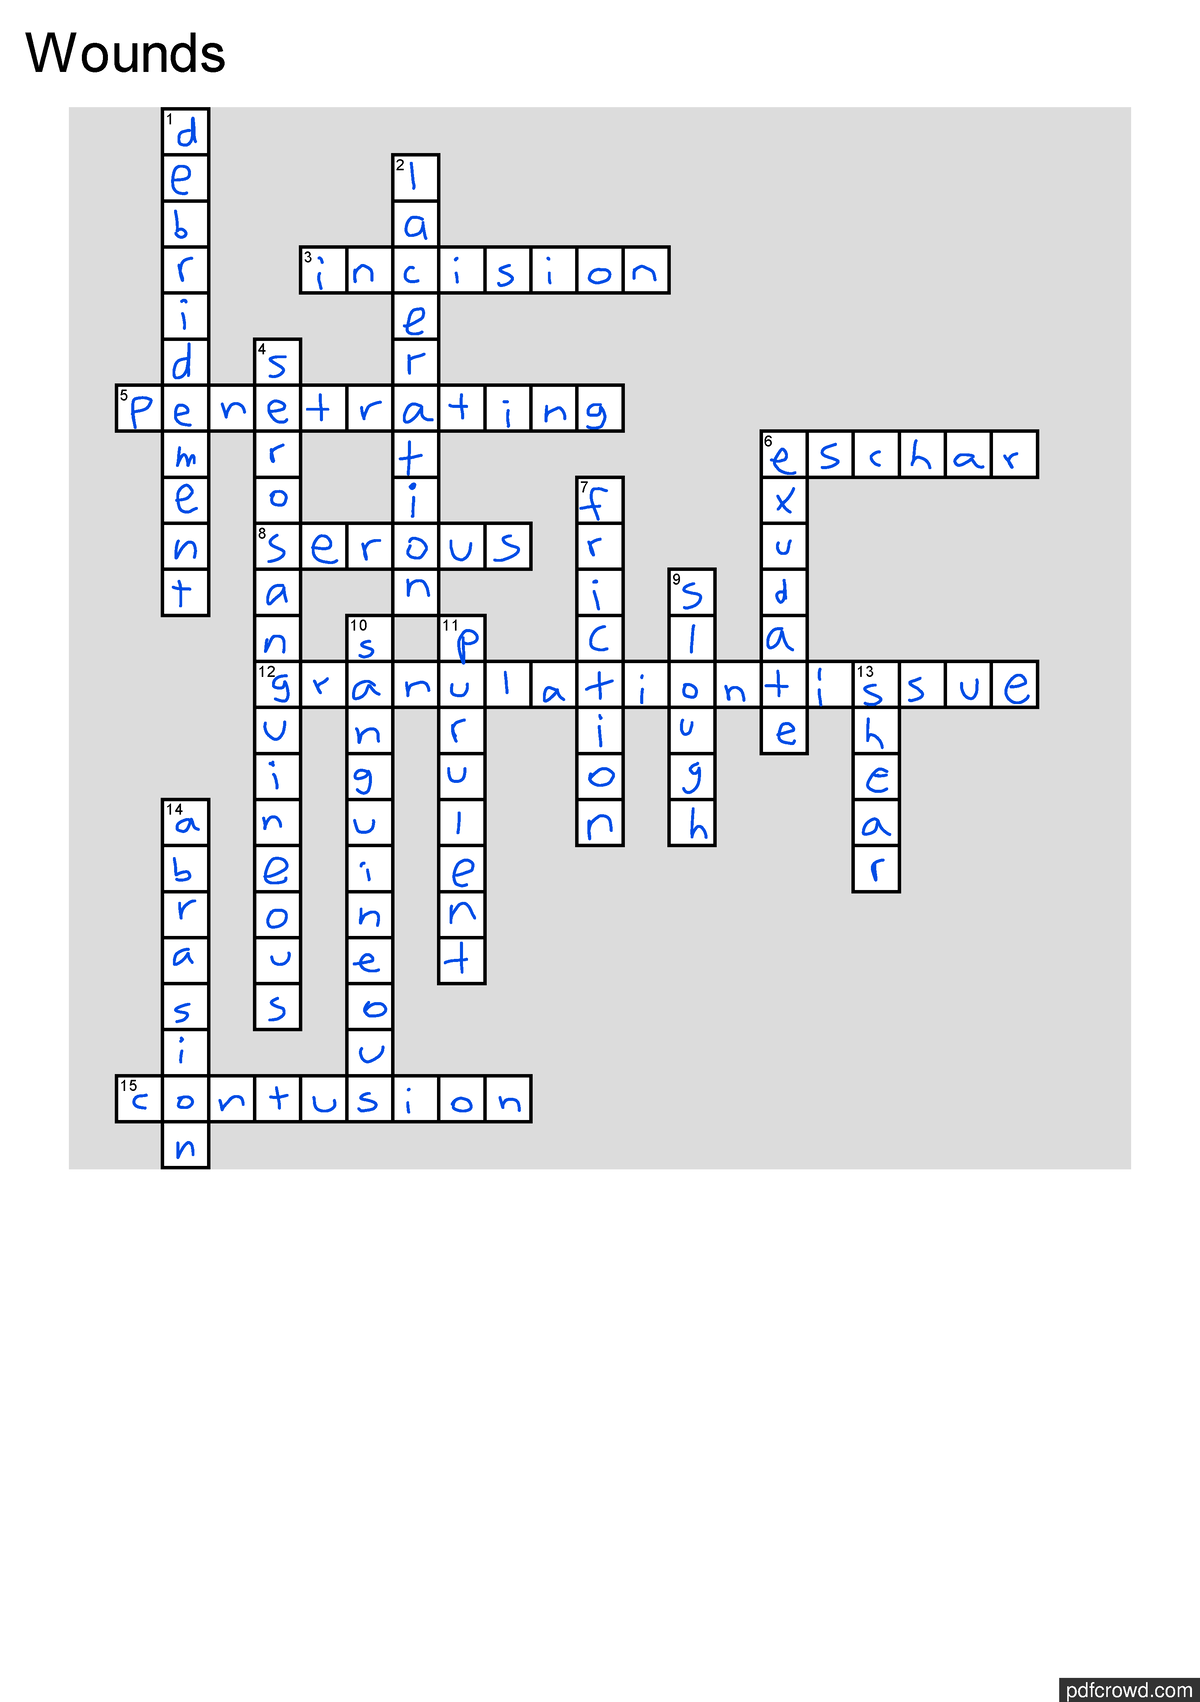 Crossword Wounds Completed pdfcrowd Wounds 1 2 3 4 5 6 7 8 9 10